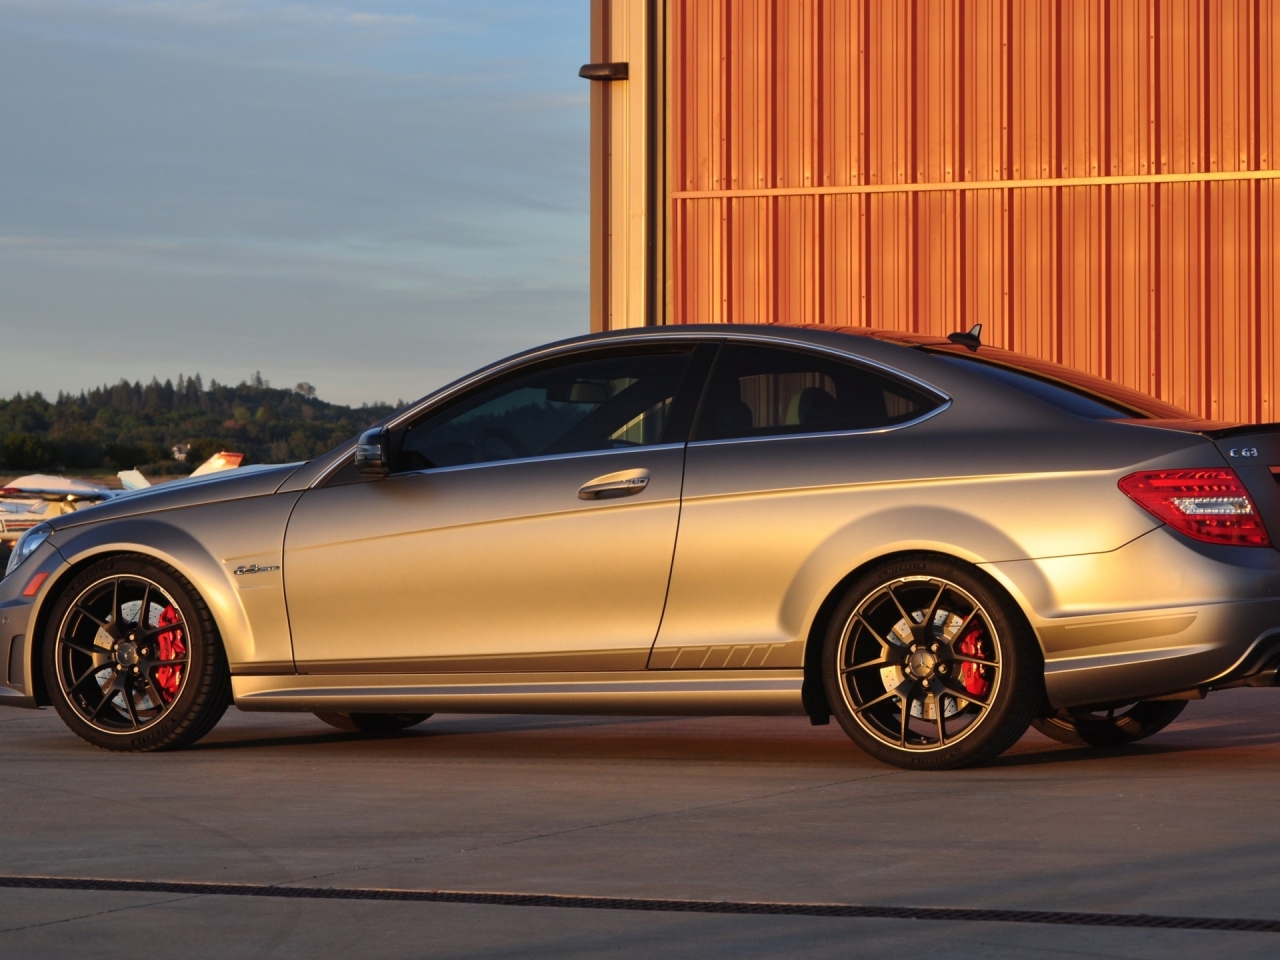 2015 Mercedes Benz C63 AMG Coupe 507 edition